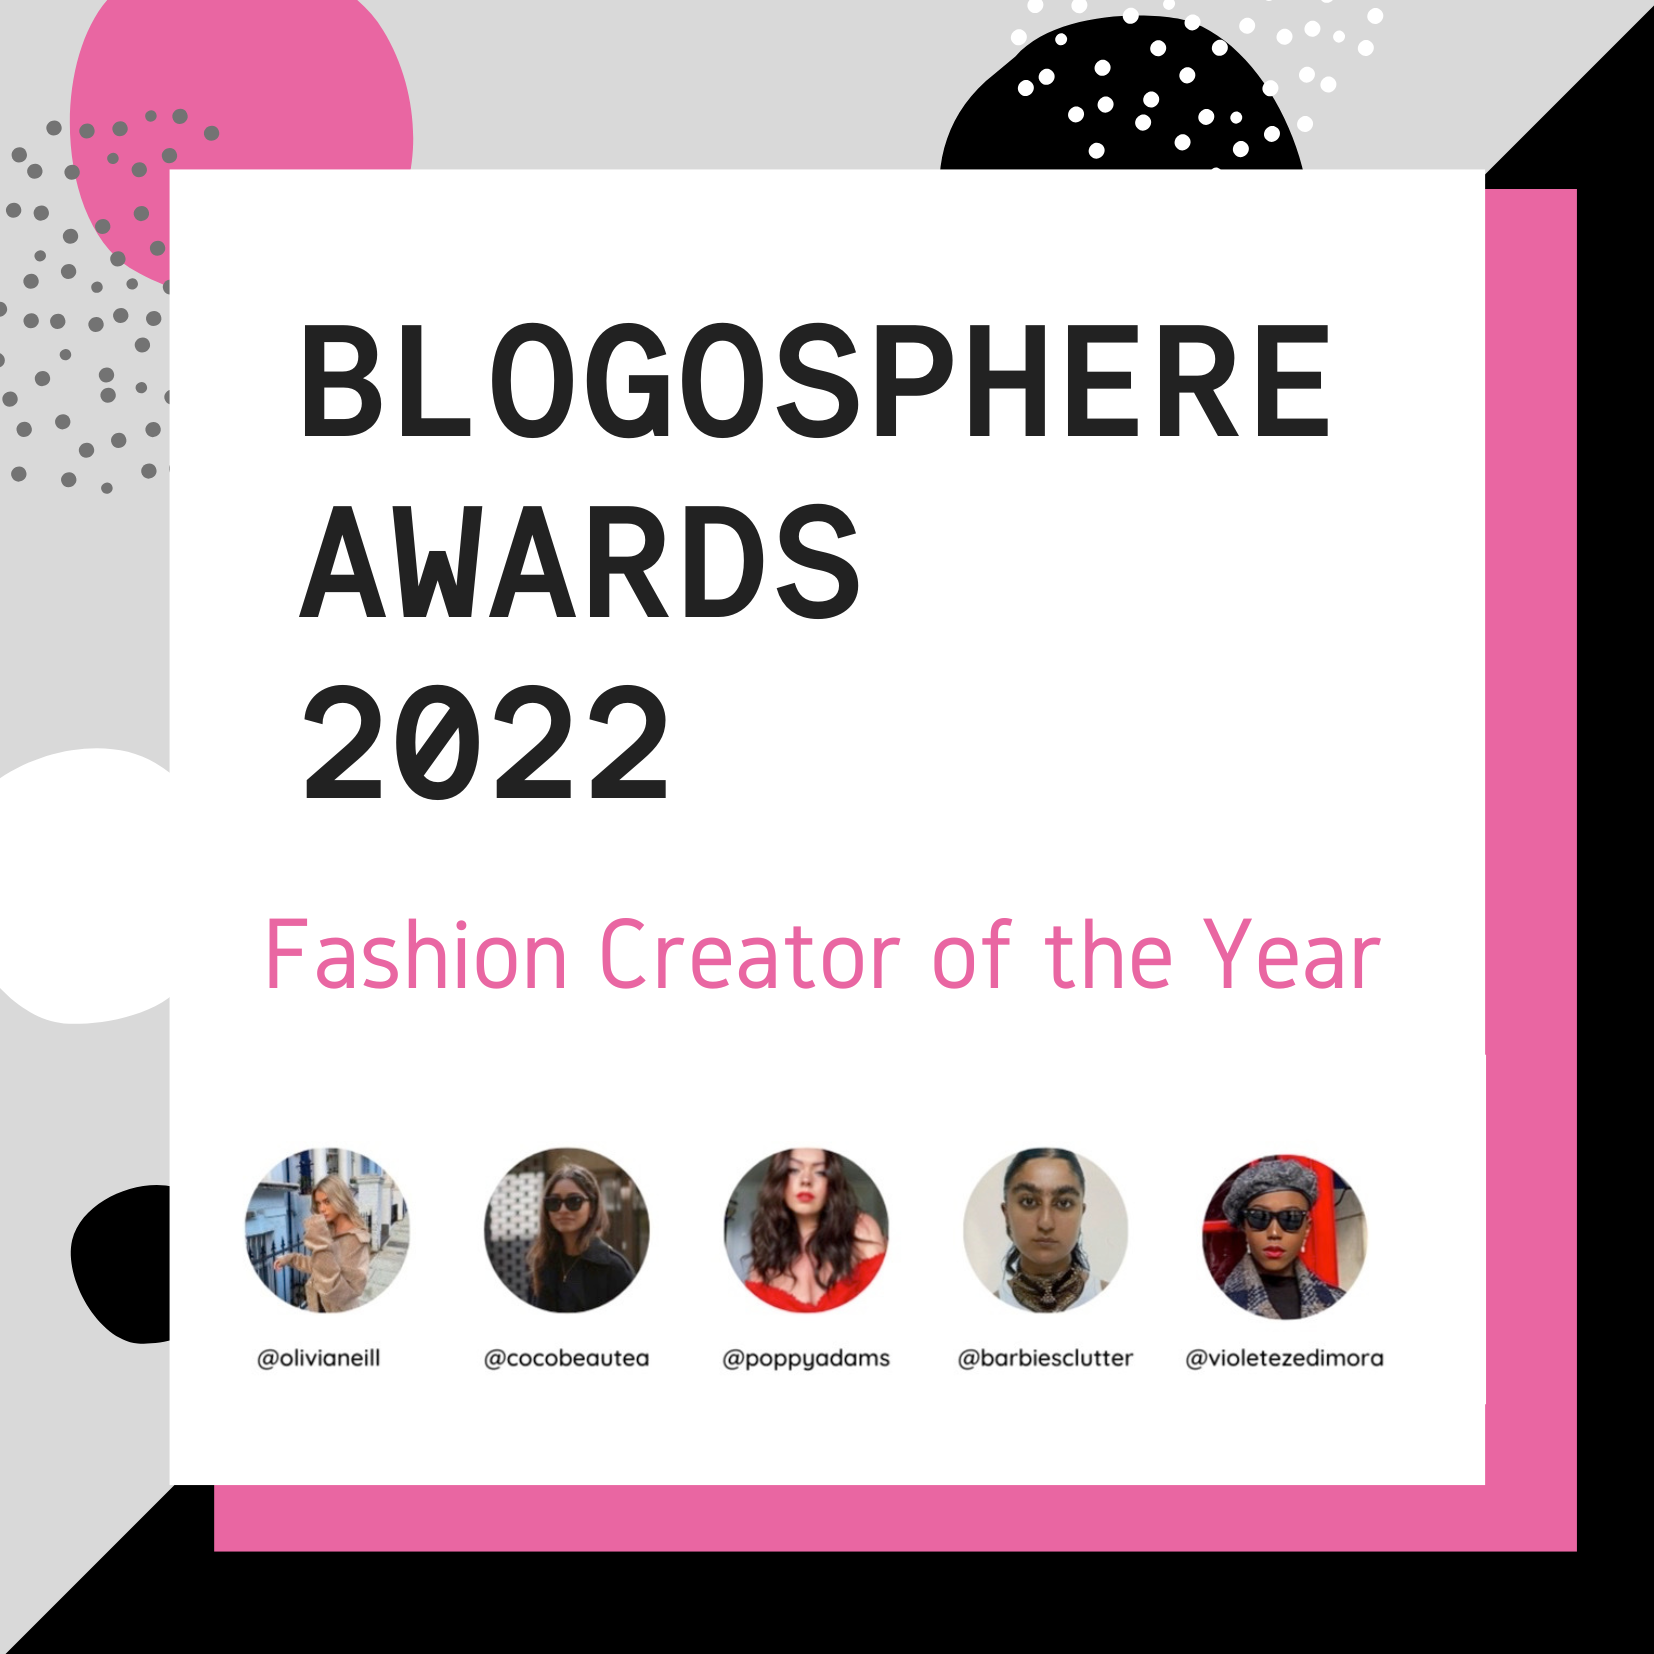 We are proud to sponsor the Fashion Creator of the Year category at this year's Blogosphere awards